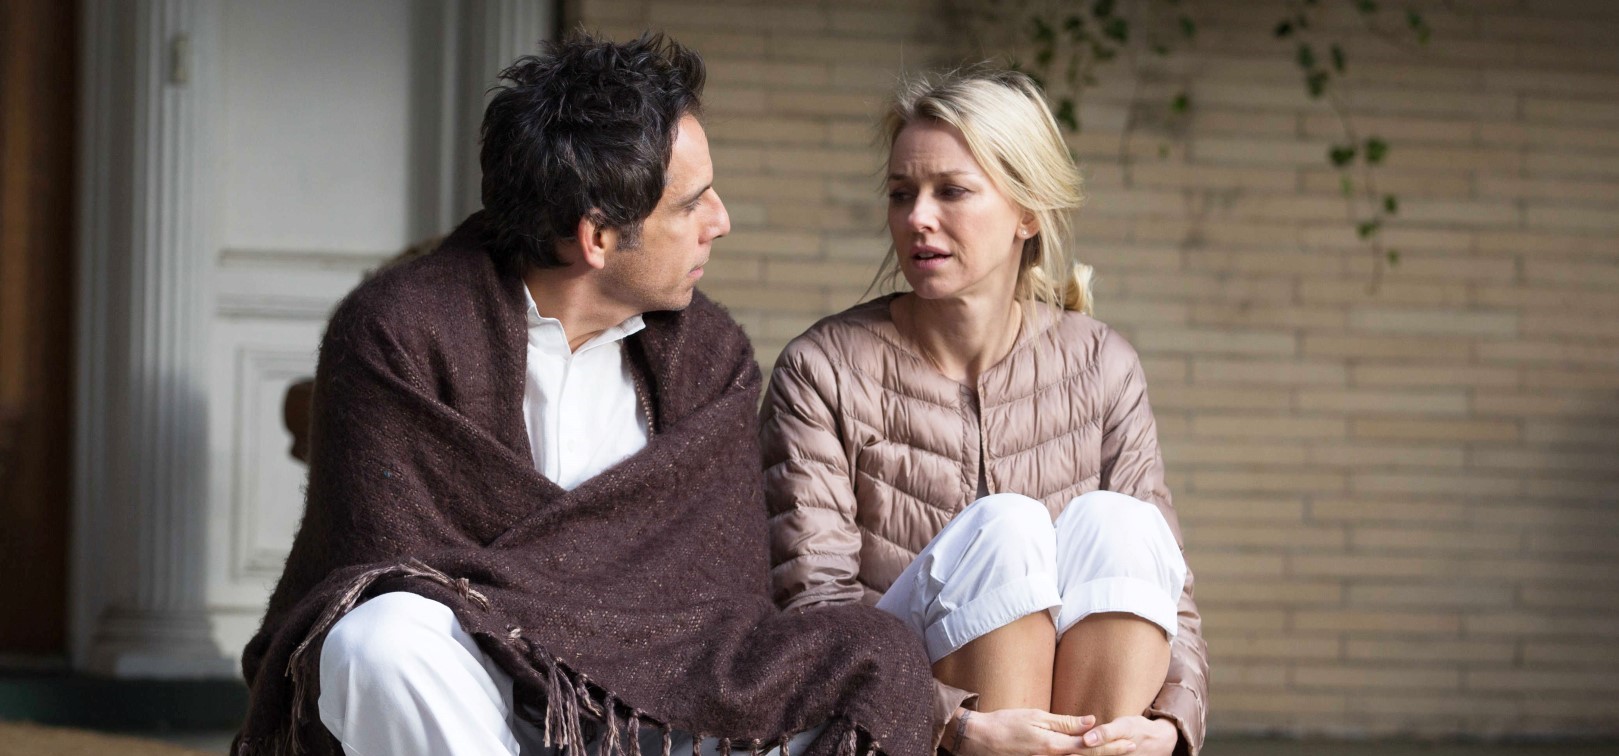 Review – While We’re Young (2015)